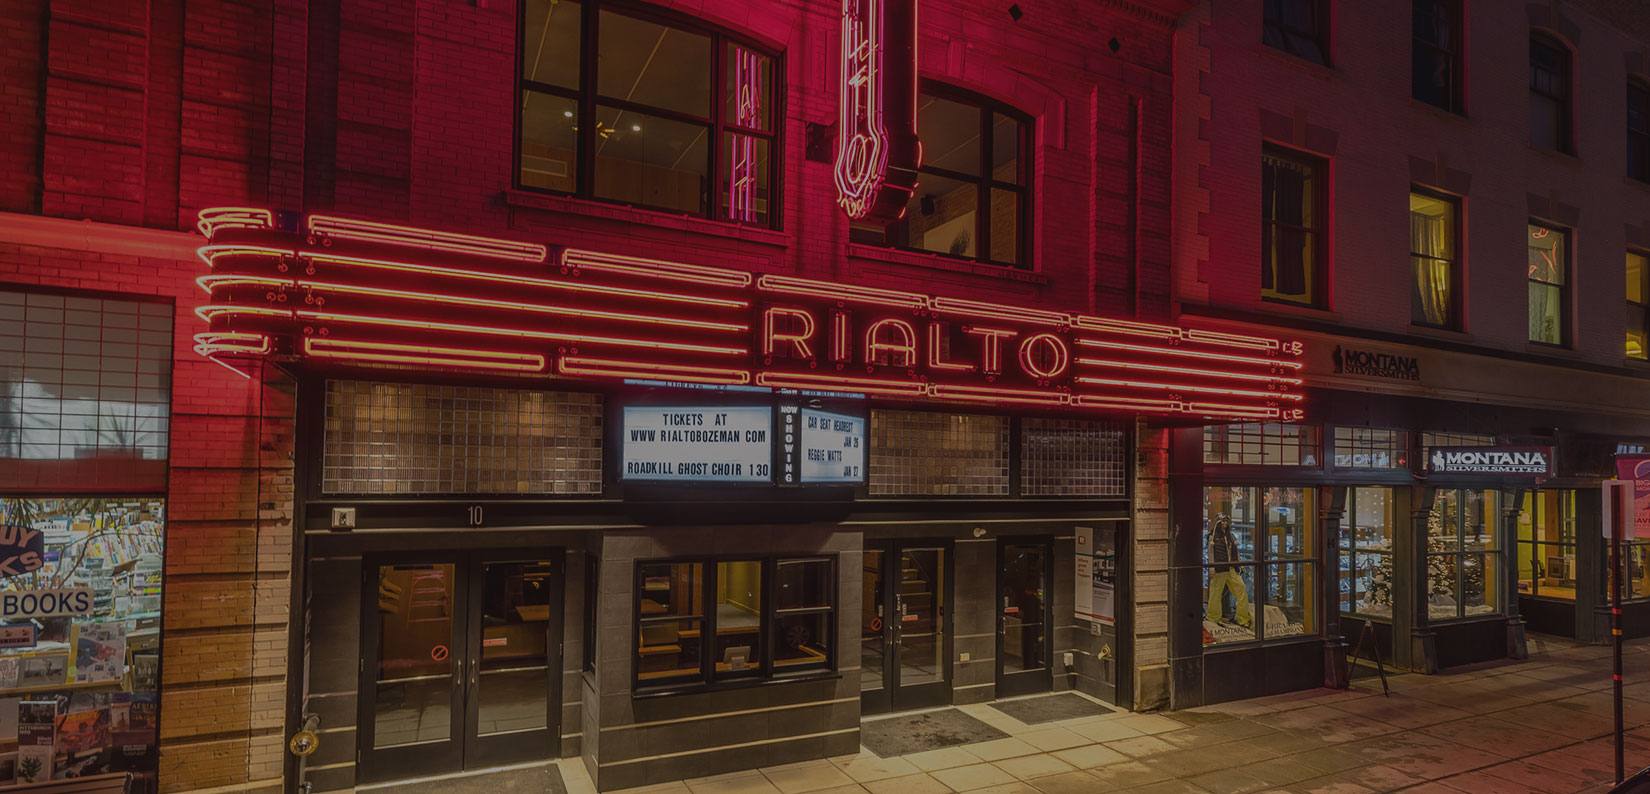 nighttime view of Rialto marquee